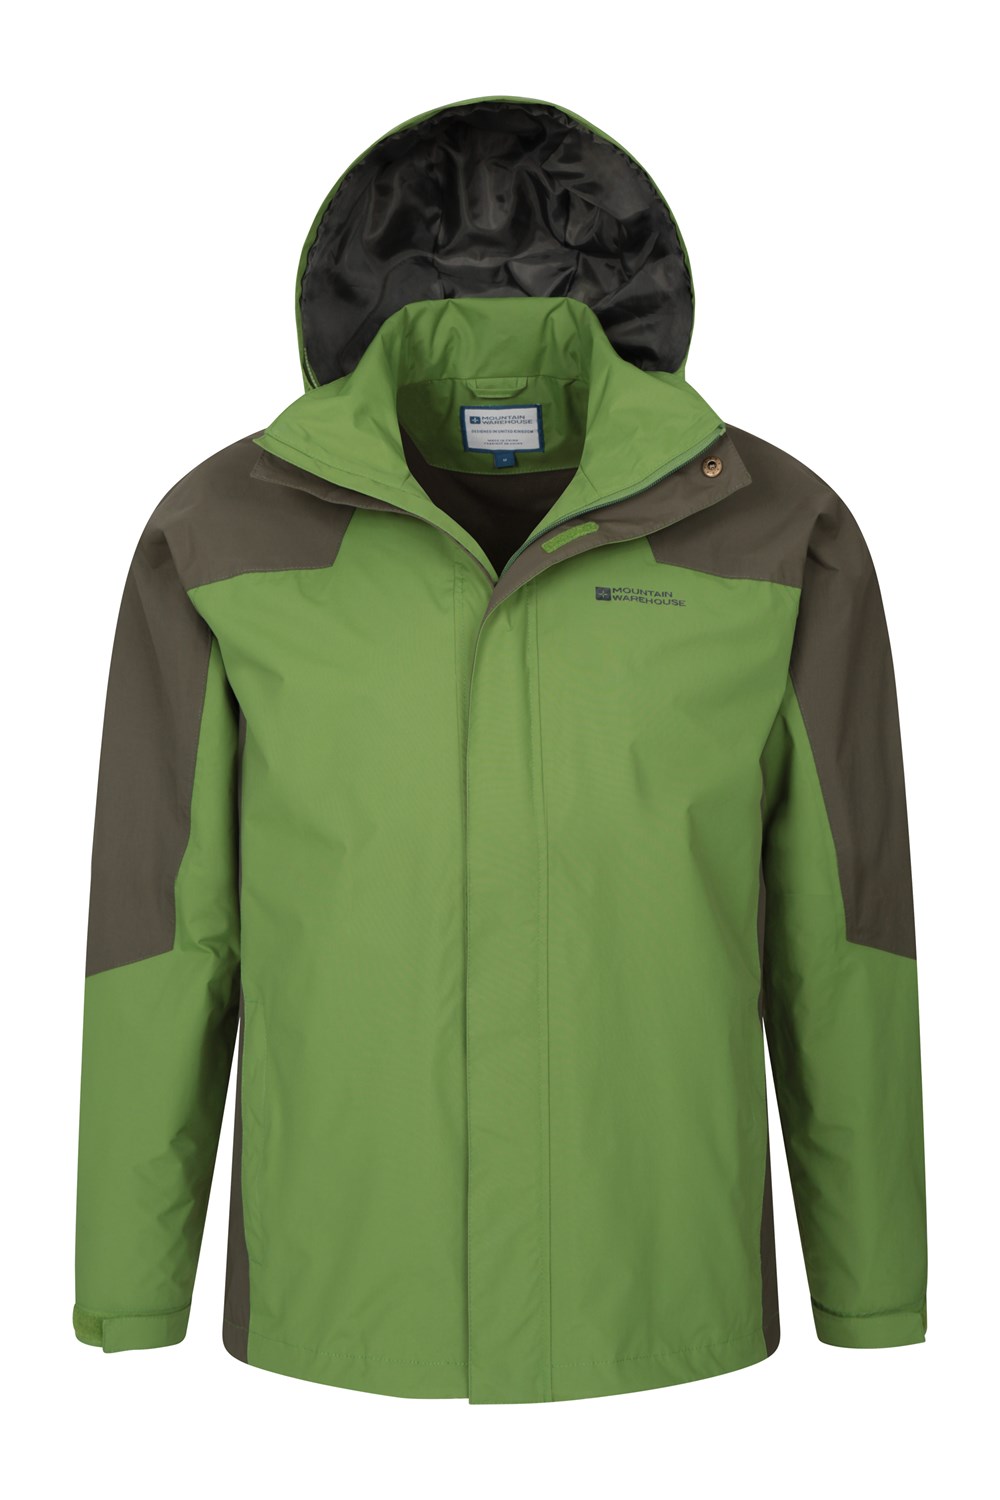 Mountain Warehouse Mens Waterproof Jacket with Taped Seams and Mesh ...